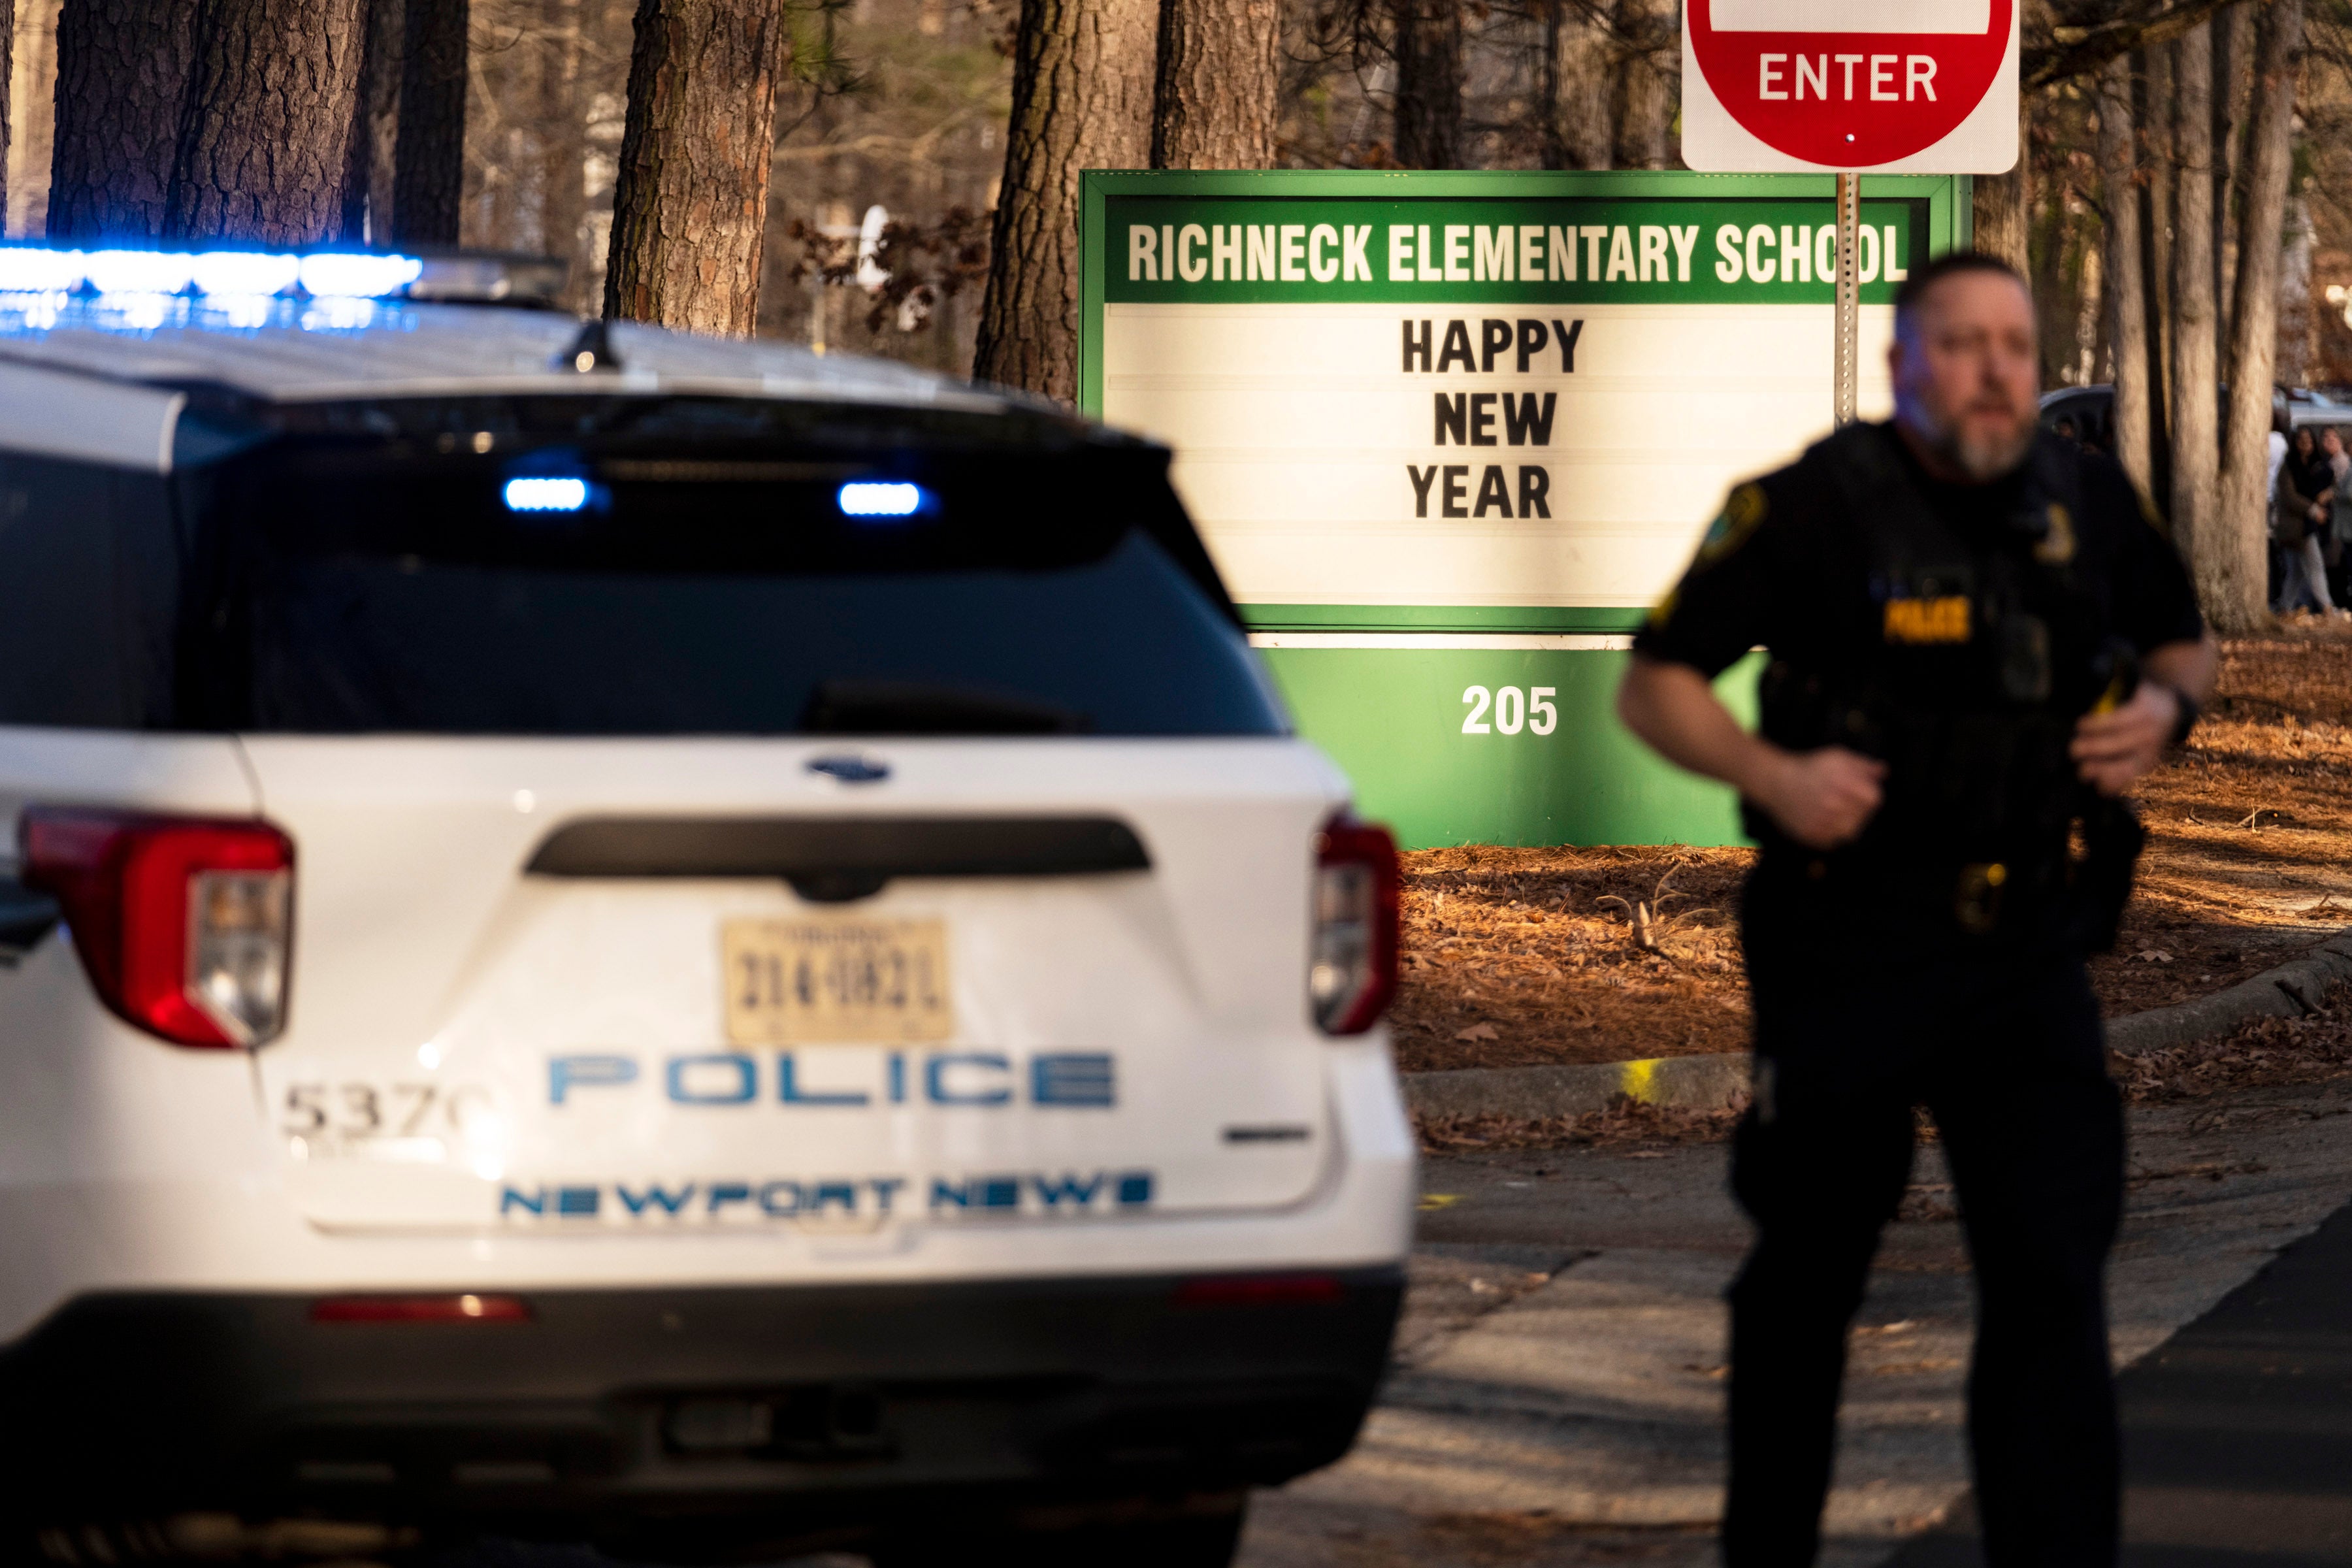 Police respond to a shooting at Richneck Elementary School, on 6 January, in Newport News